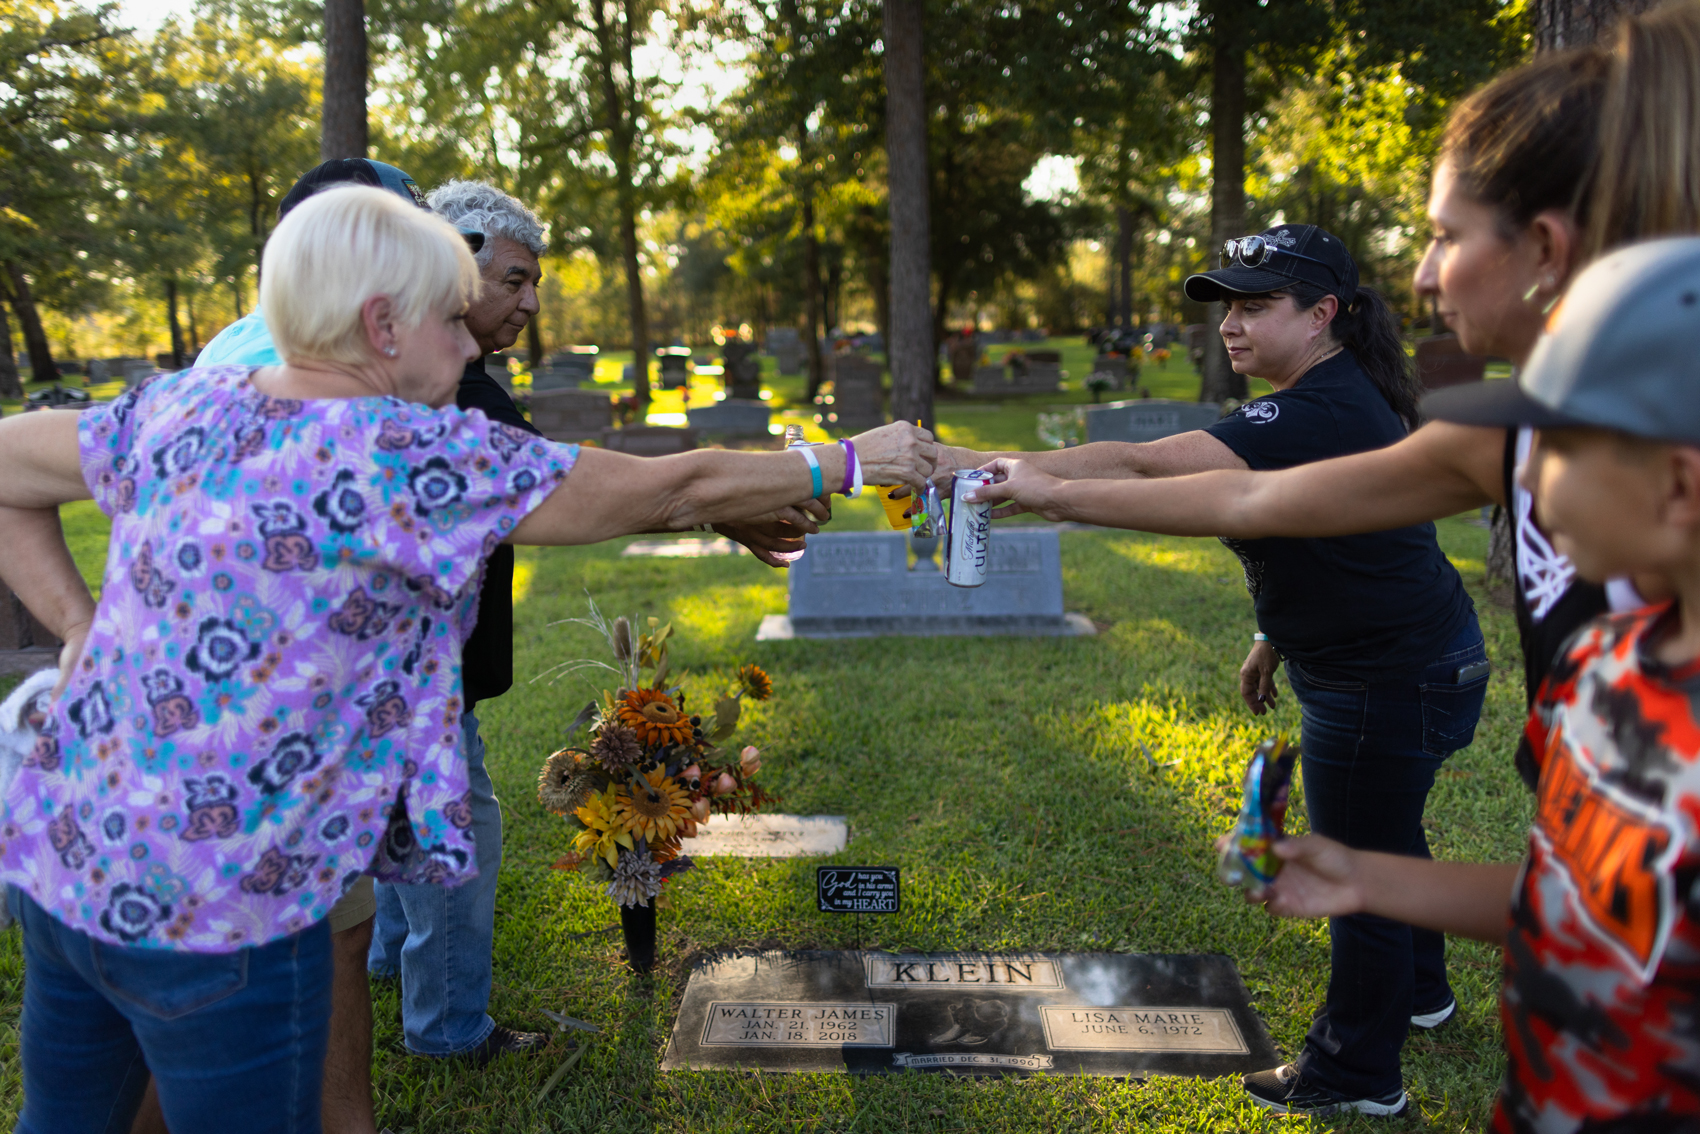 Debbie and Jaime Chapa (left) join Lisa Klein and Jaime and Connor Newton in toasting Lisa's late husband, Walt at his graveside in September. Walt died in 2018 following a heart attack at the Harris County Jail. His death was never reported to the state.